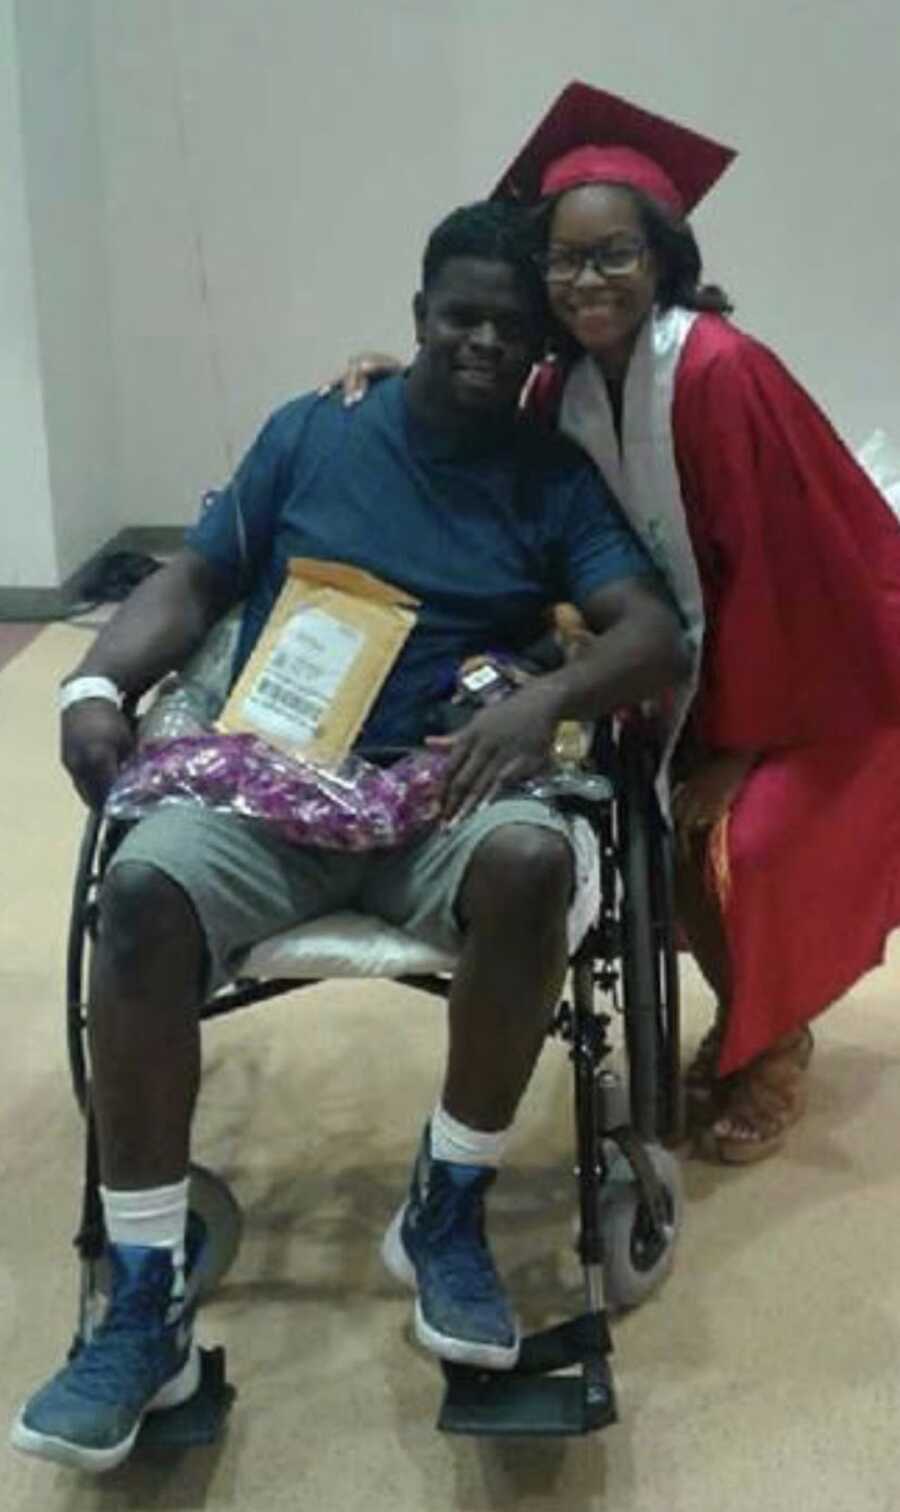 Man in wheelchair smiling with daughter